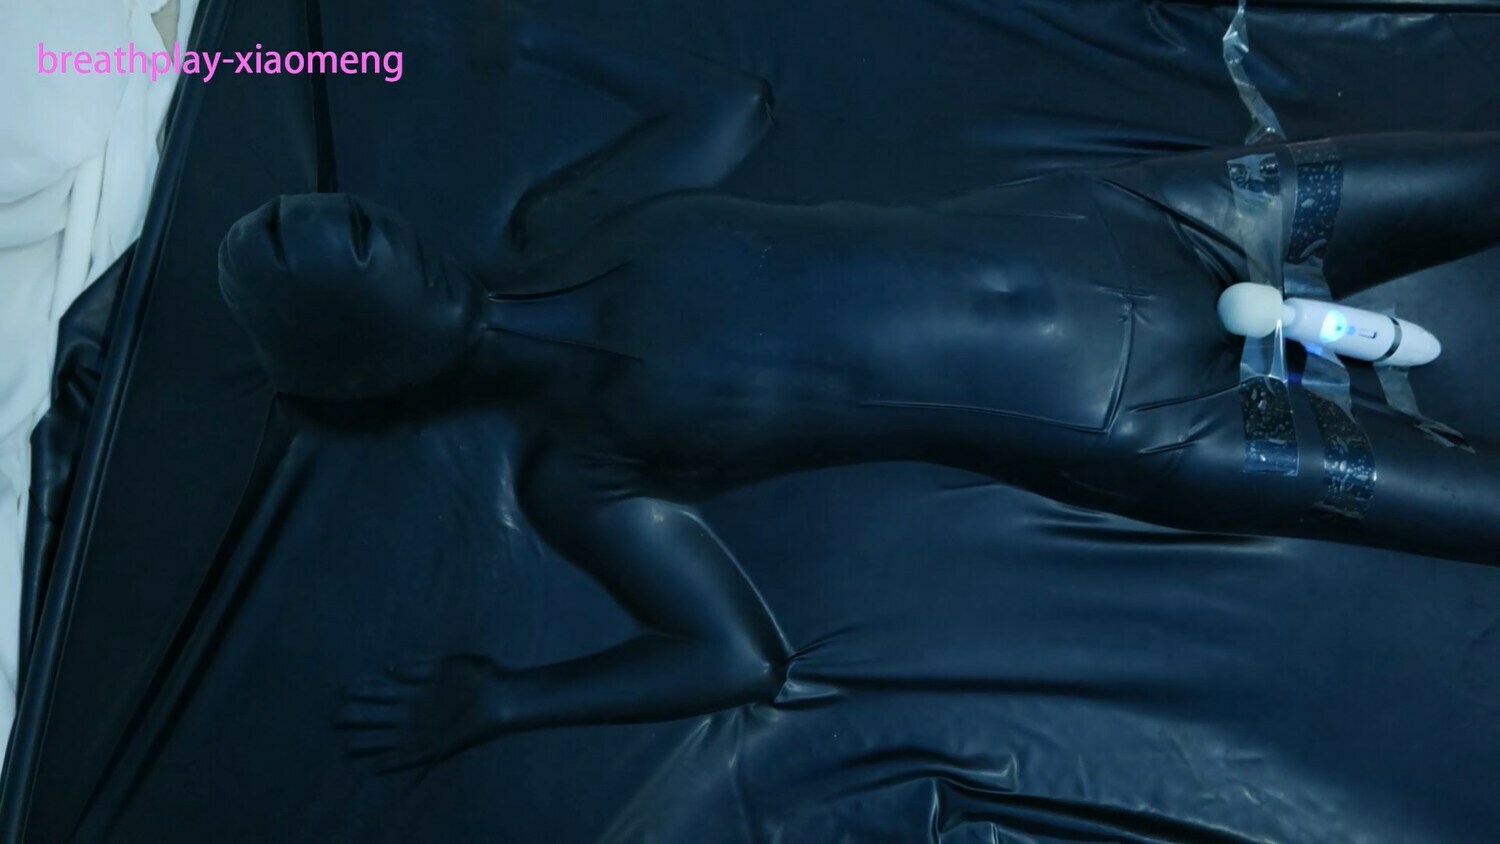 Xiaomeng Vacuum Bed Breathplay, Free Online Pornhub HD Porn xHamster.